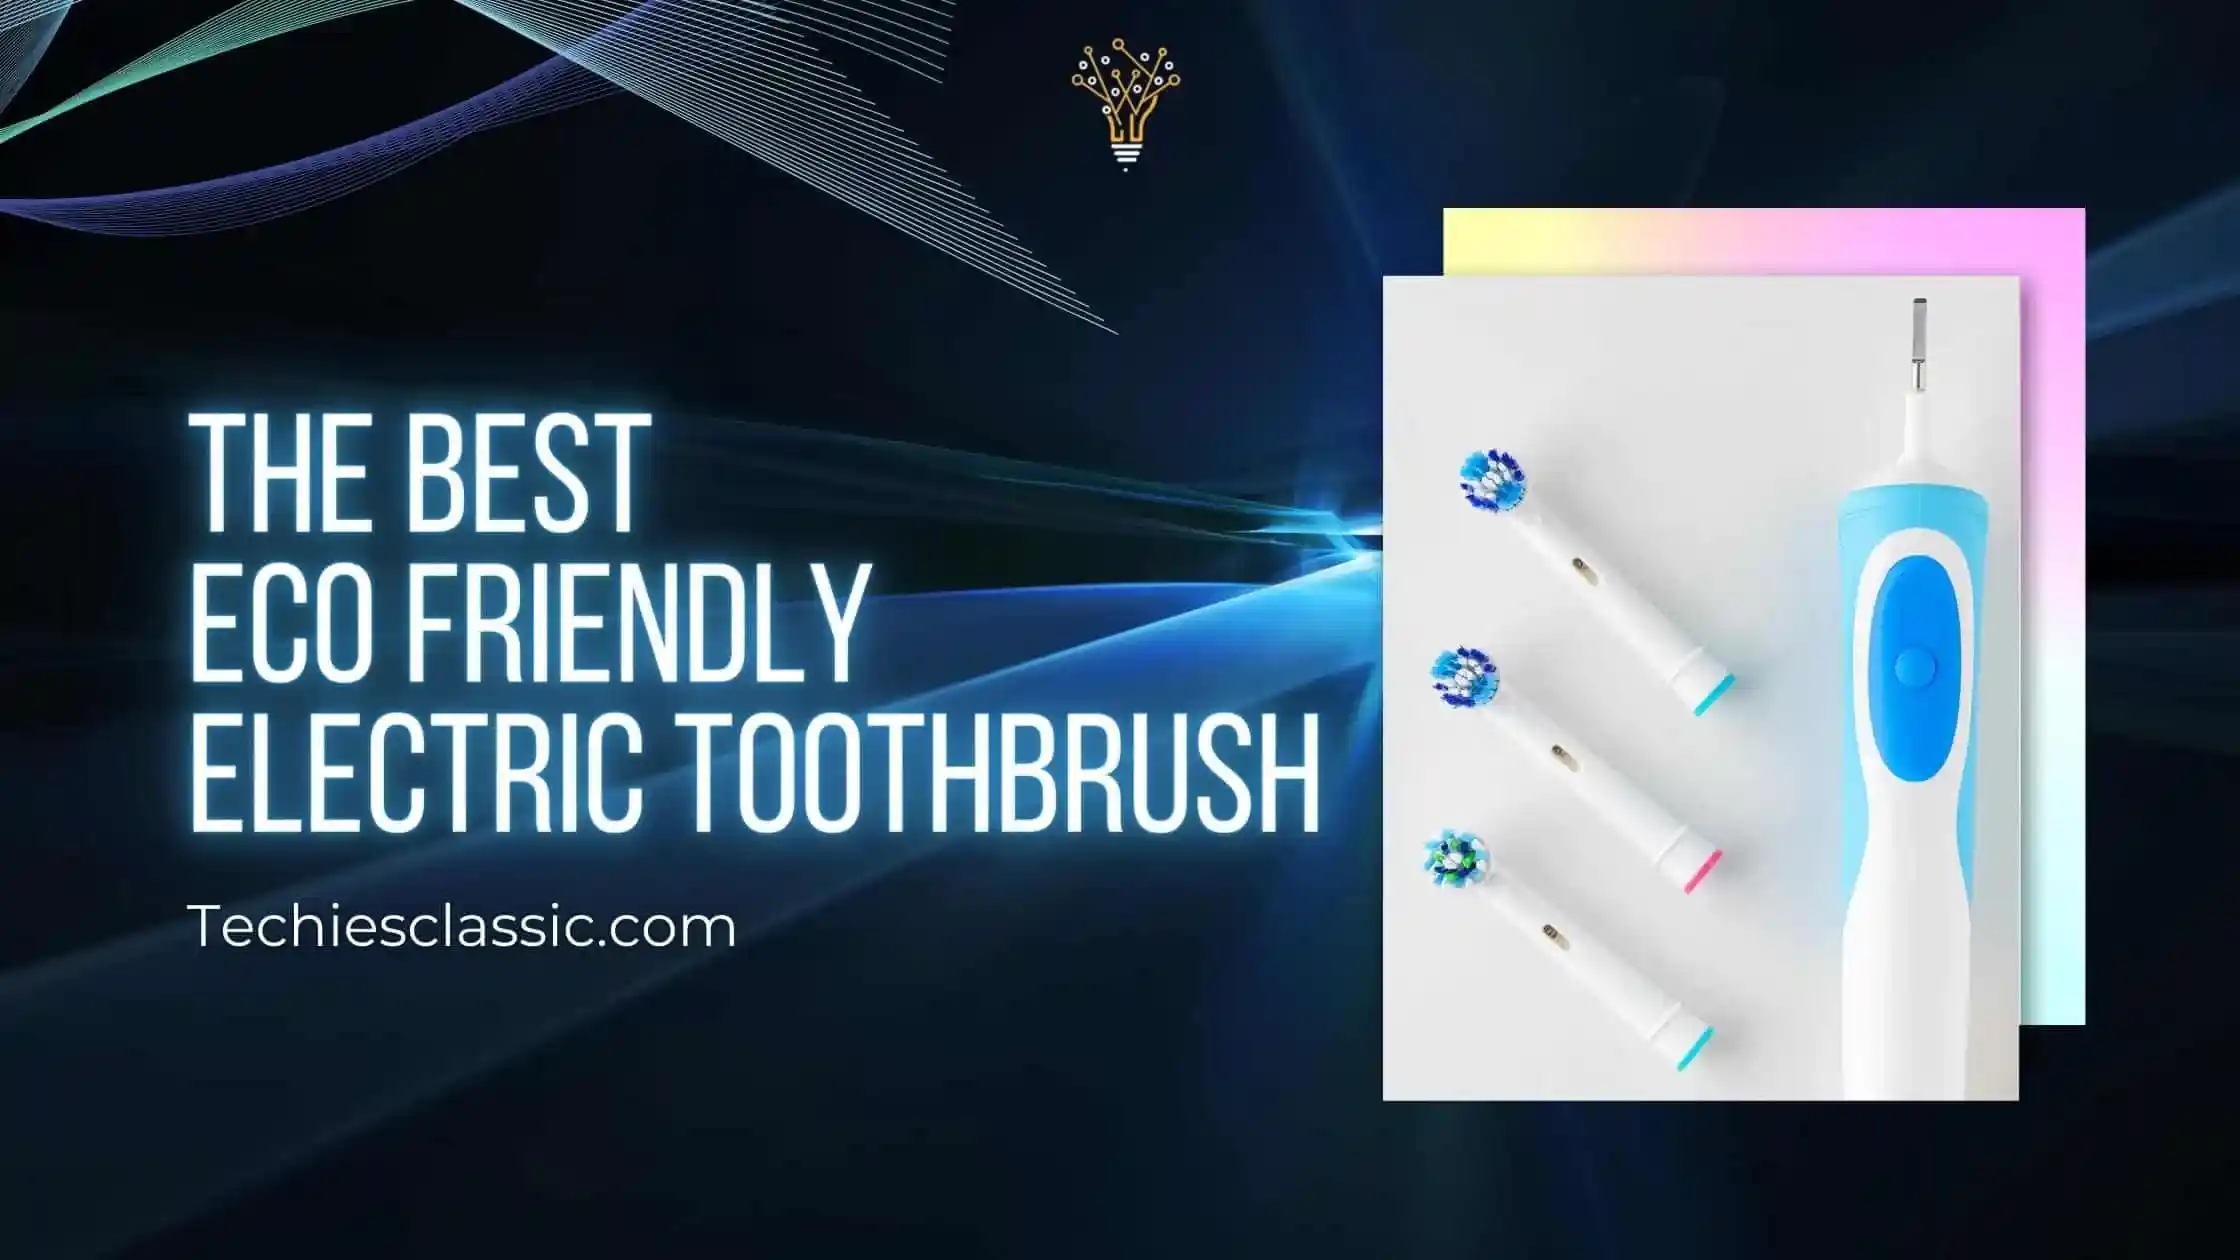 10 Best Eco Friendly Electric Toothbrush Reviews in 2023